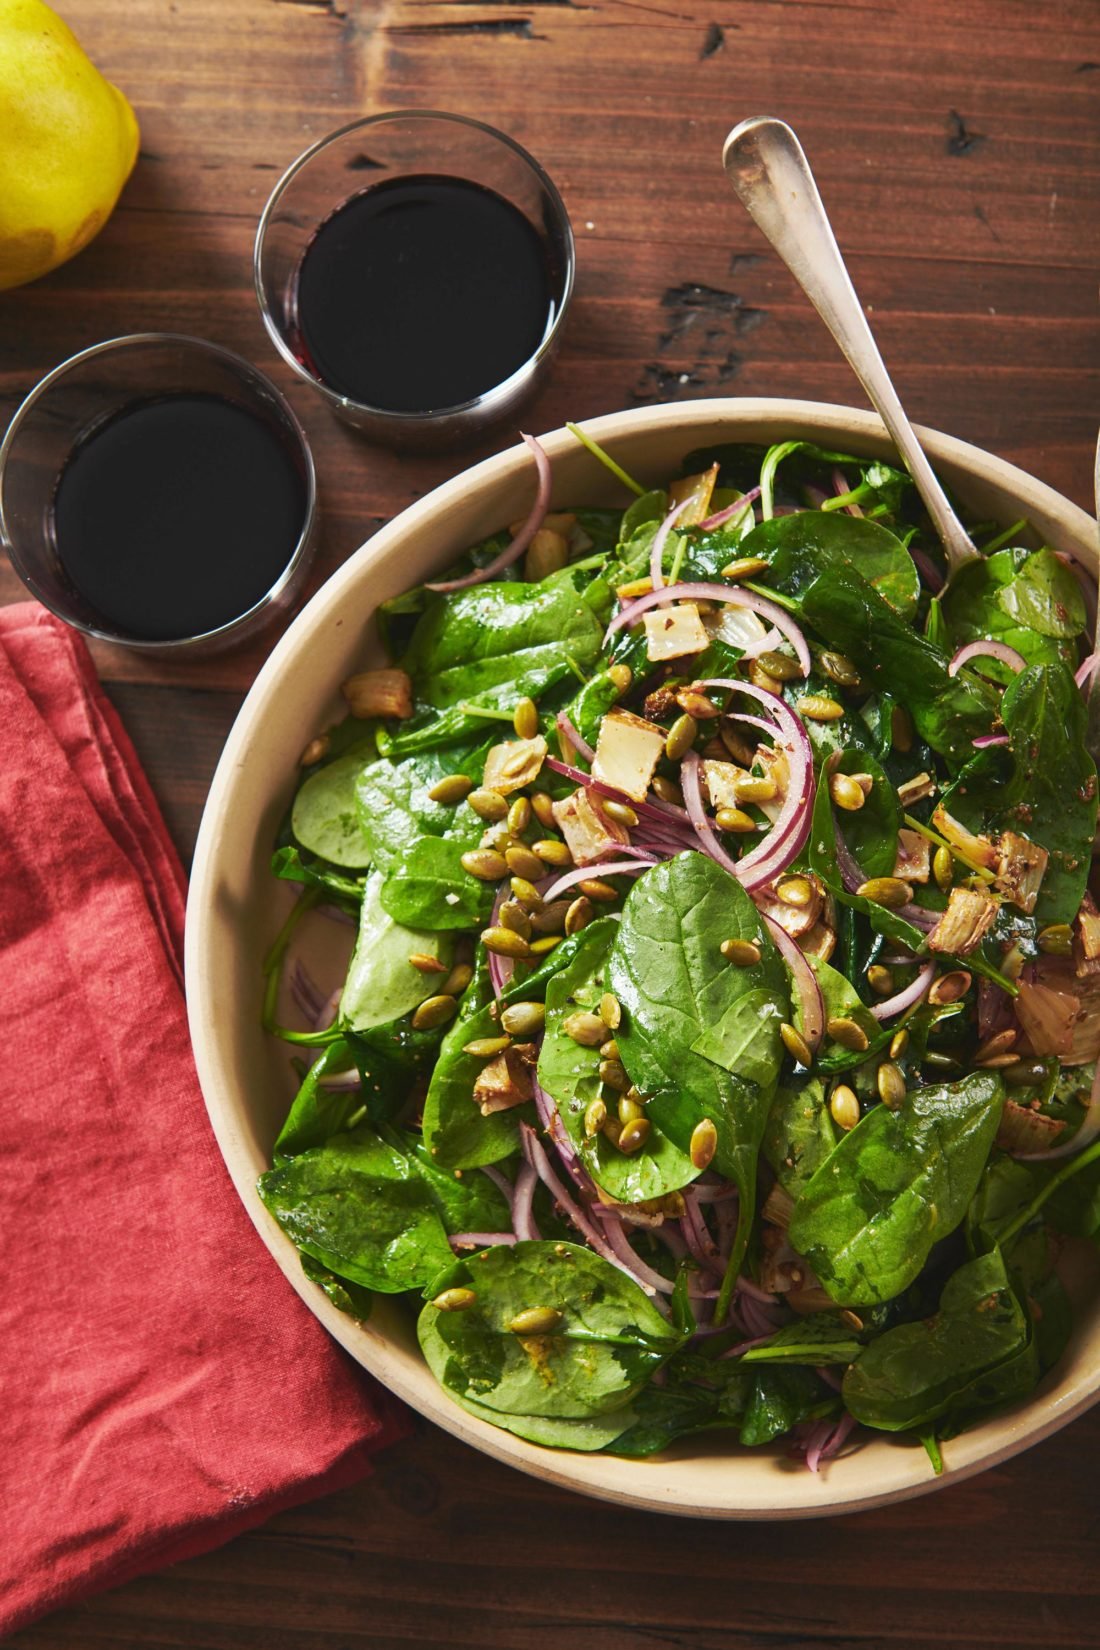 Spinach Salad with Roasted Fennel